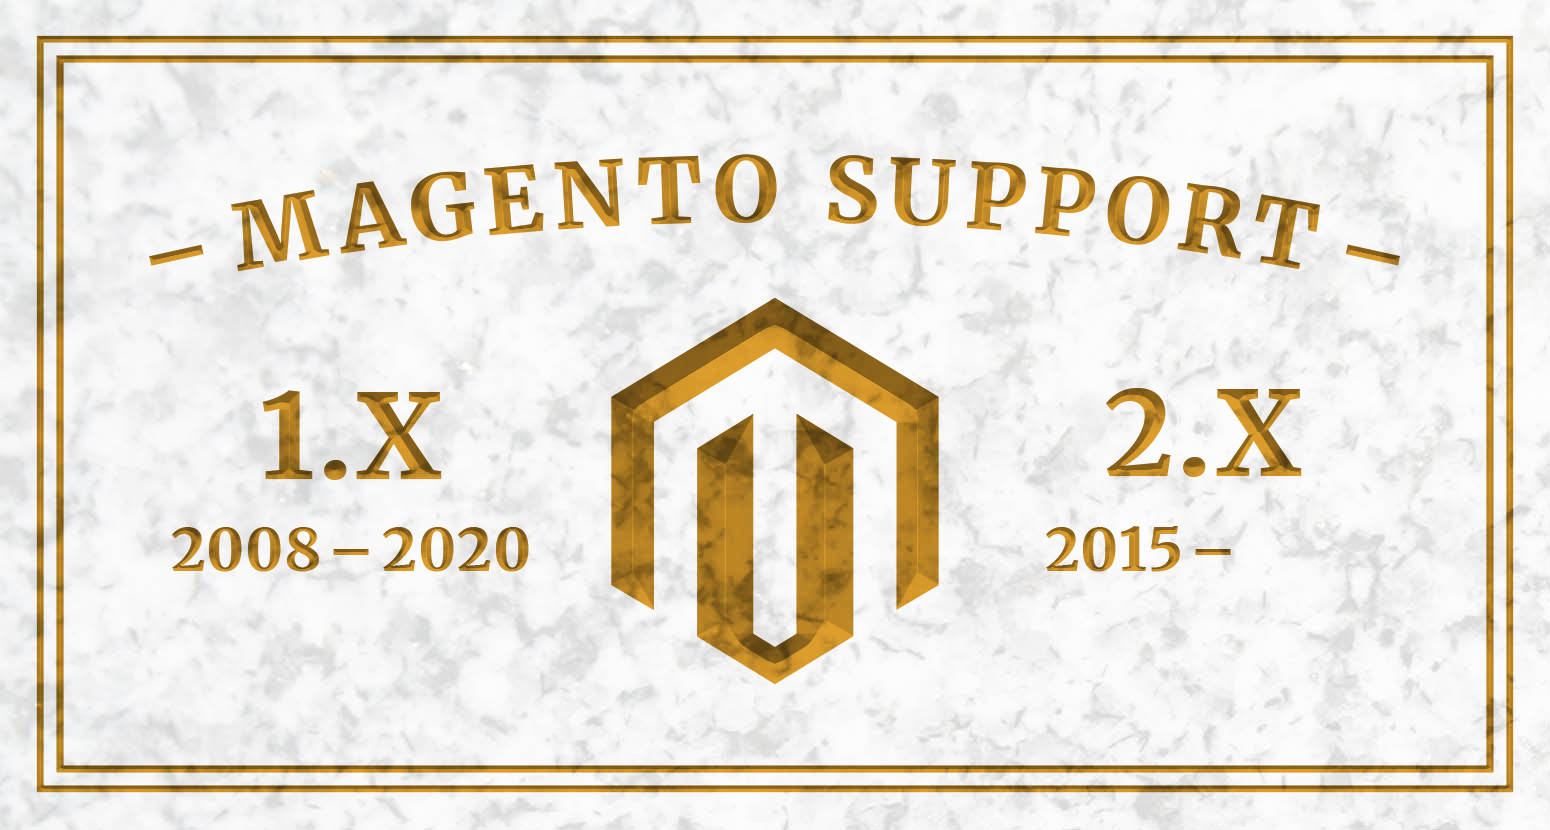 The End of Support for Magento 1